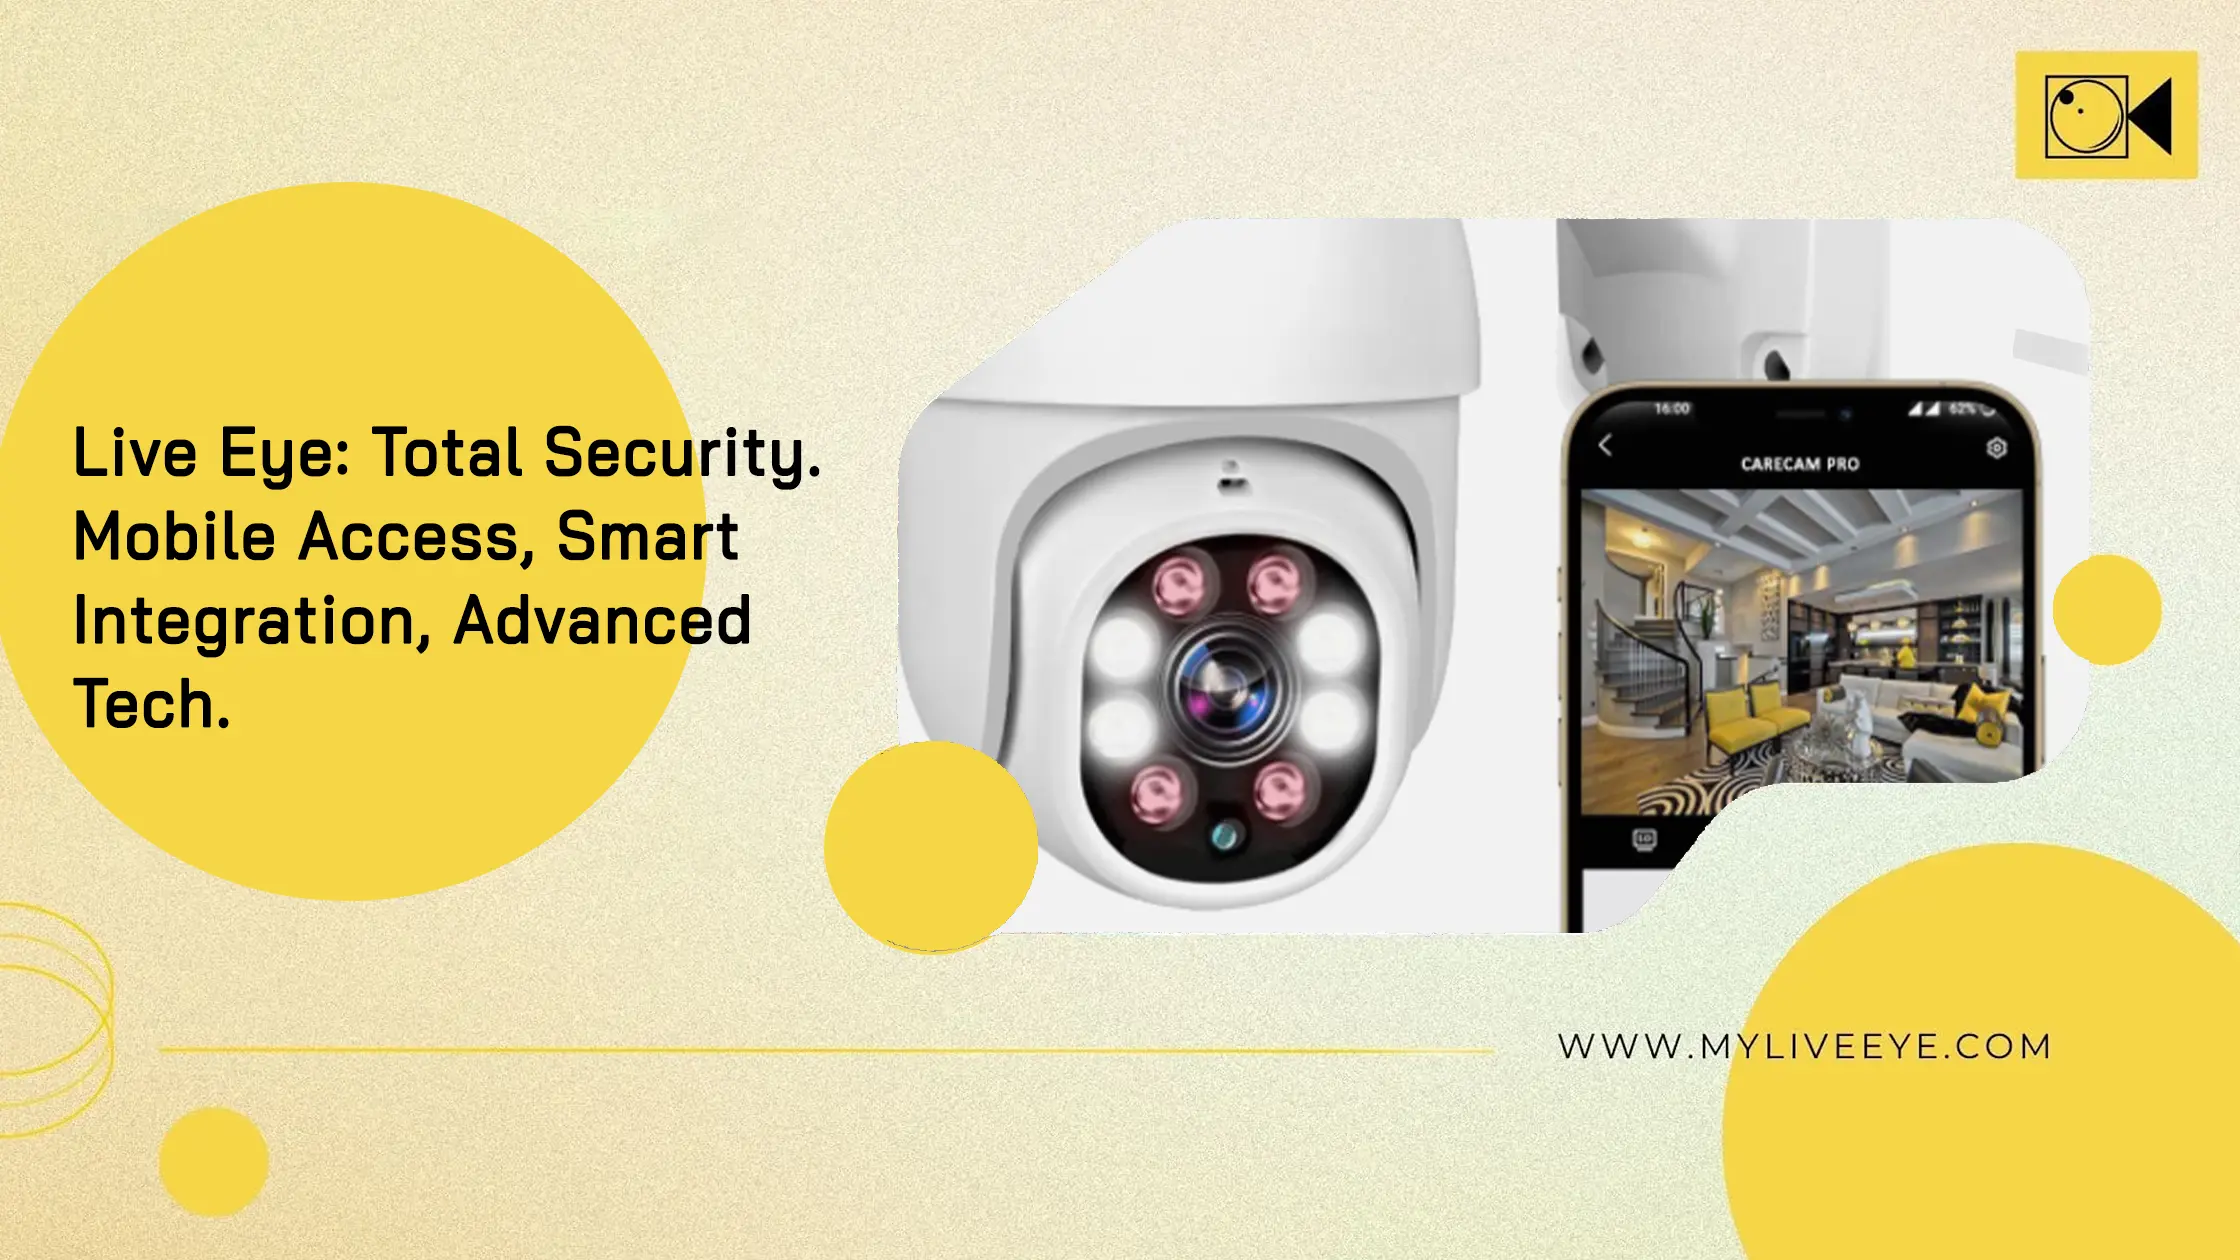 Live Eye: Revolutionizing Home Security with Remote Cameras